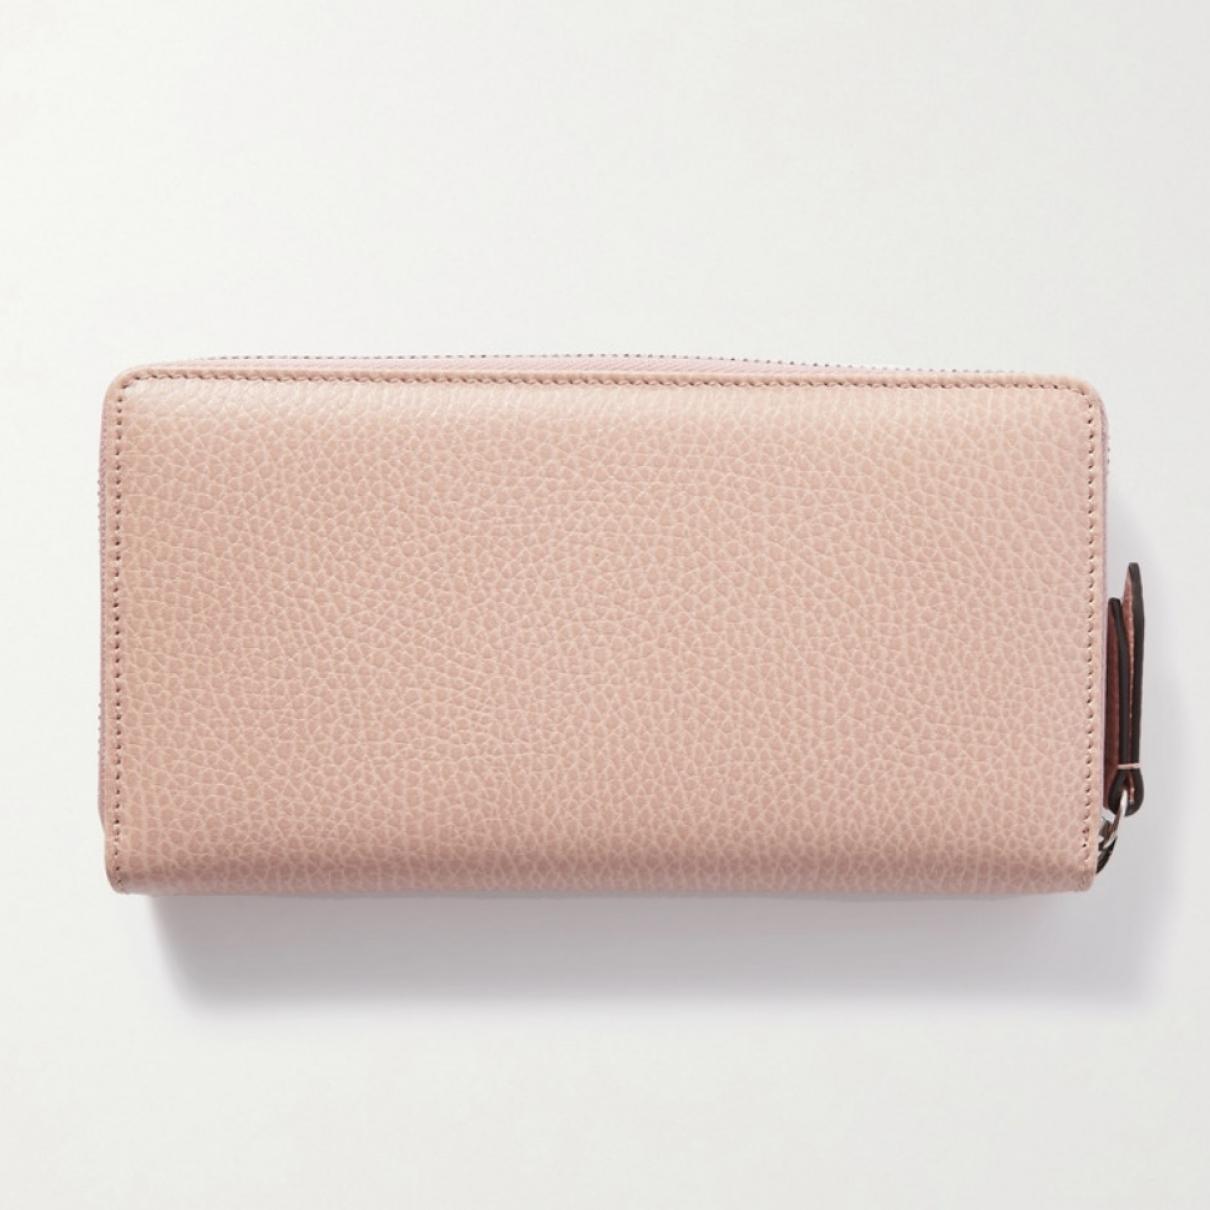 Marmont leather wallet - 2